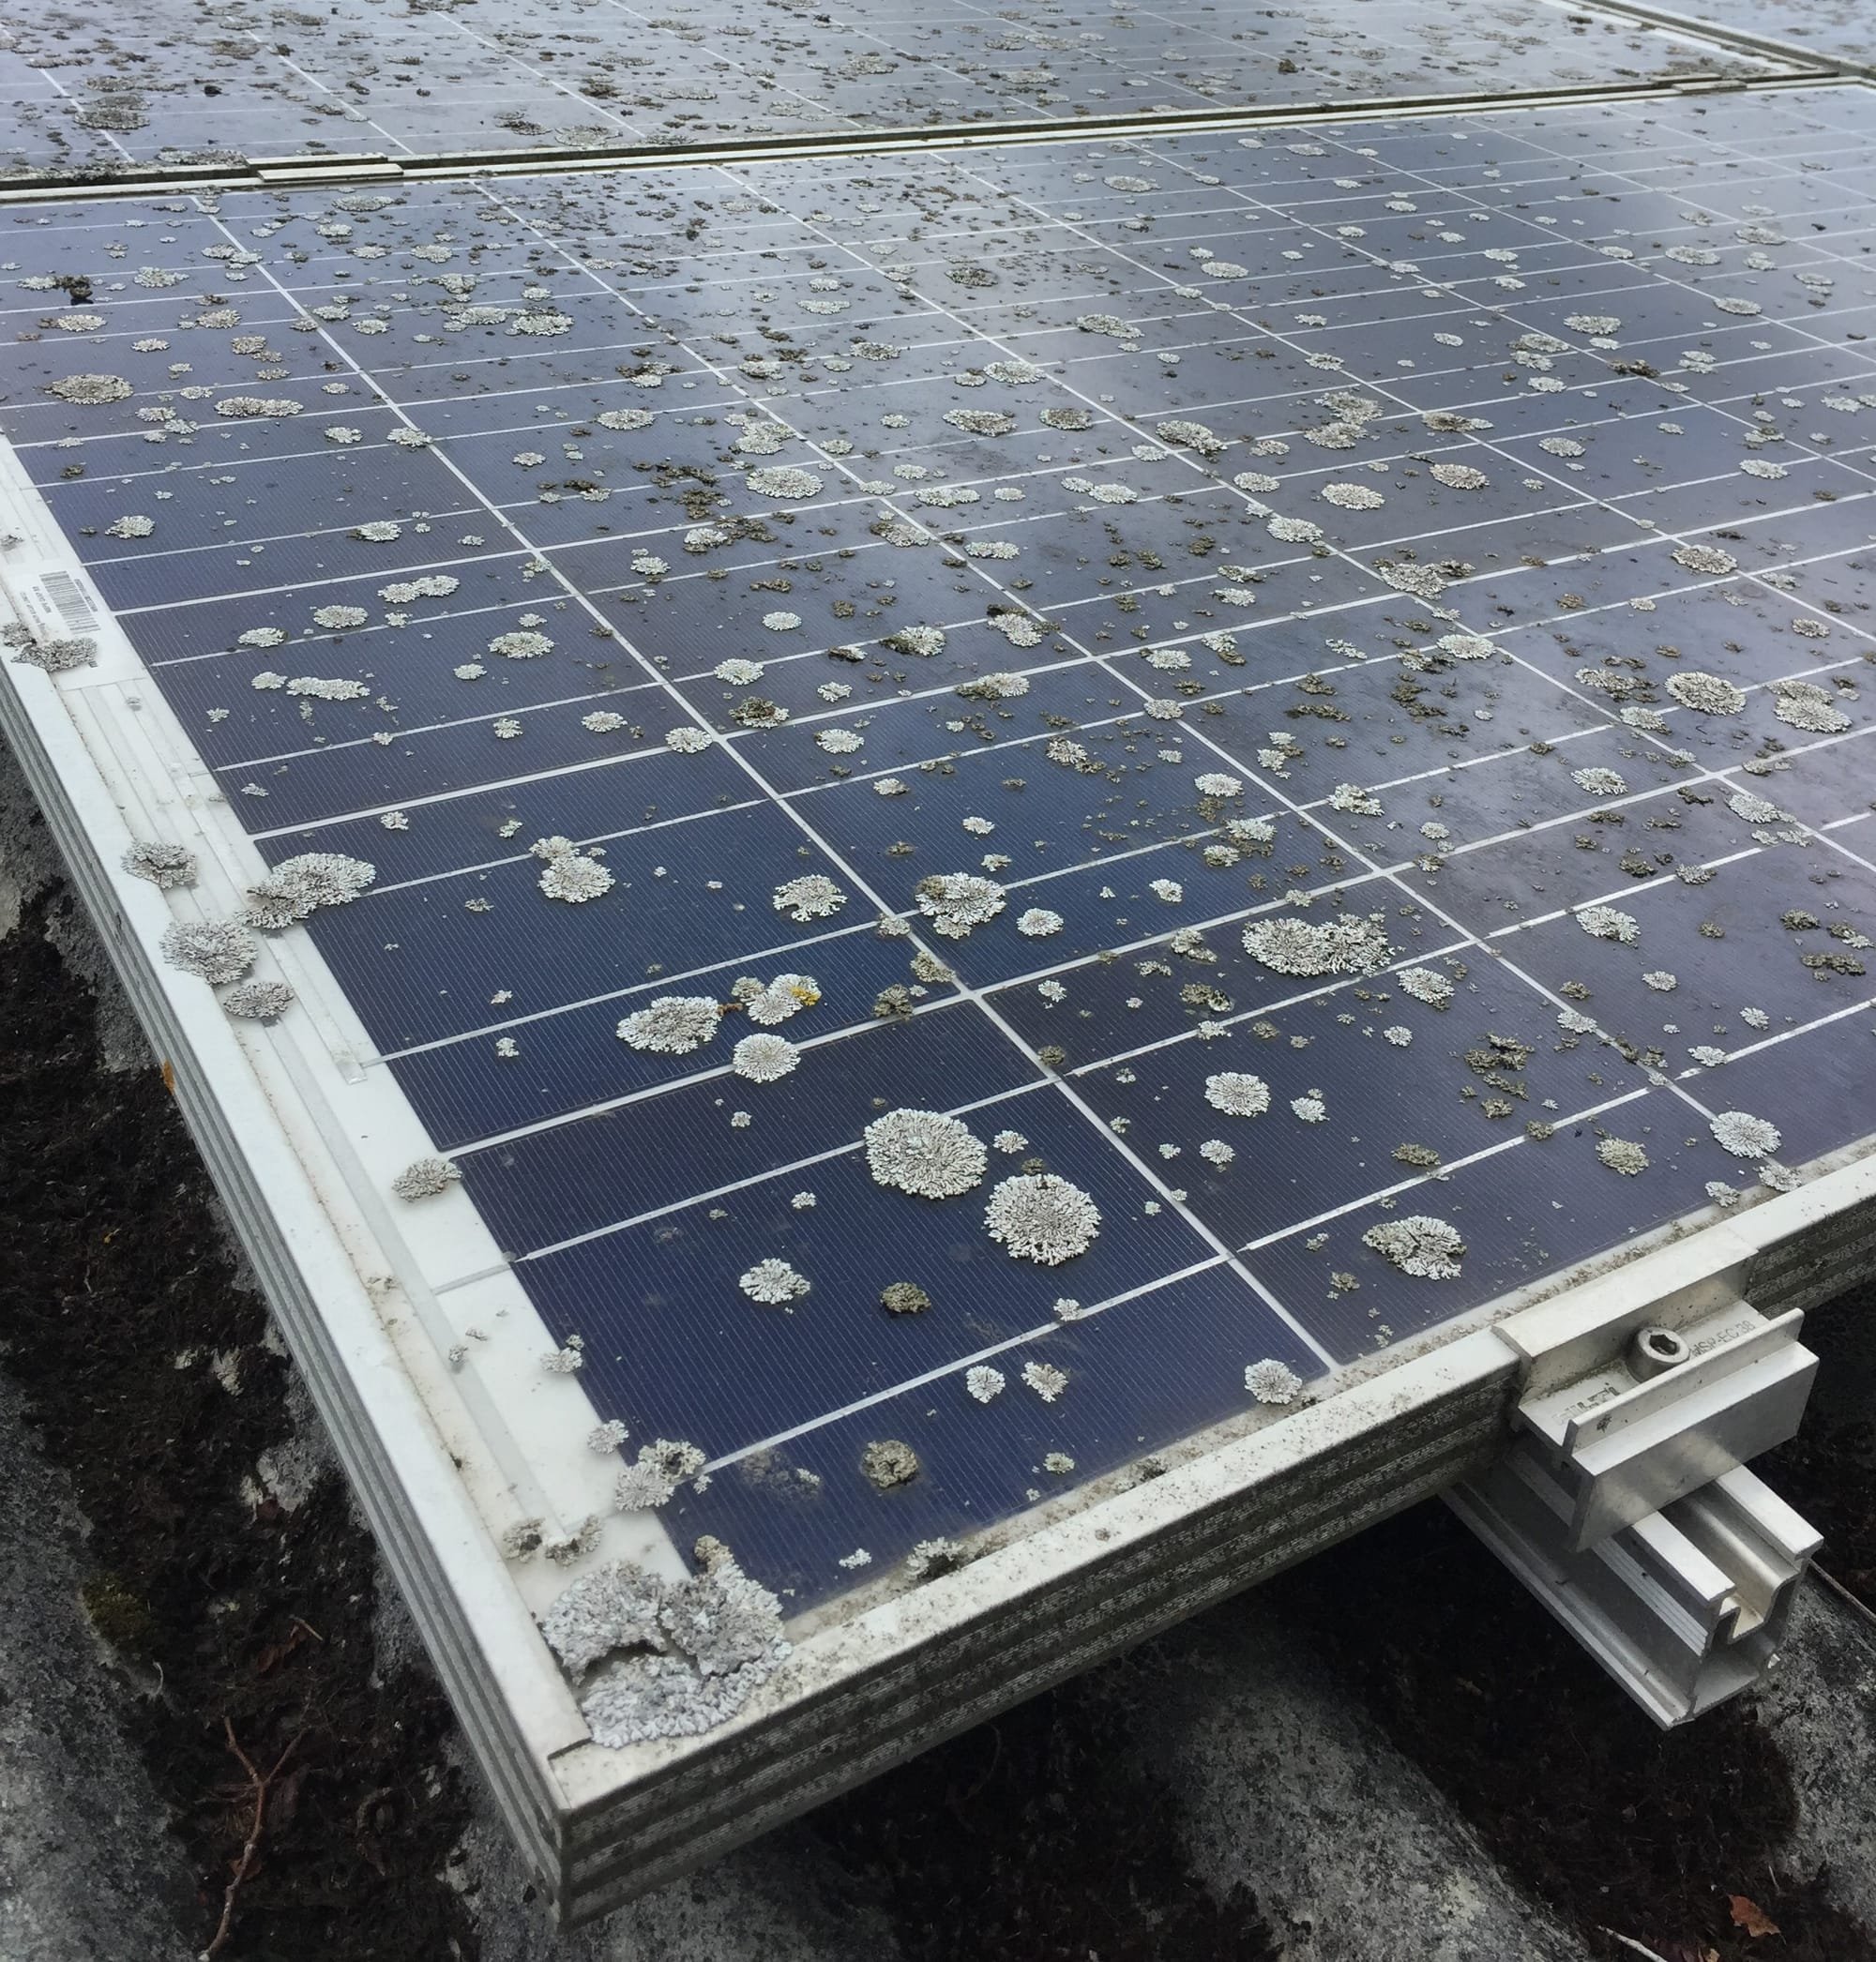 Solar Partner appointed to clean 90 PV panels